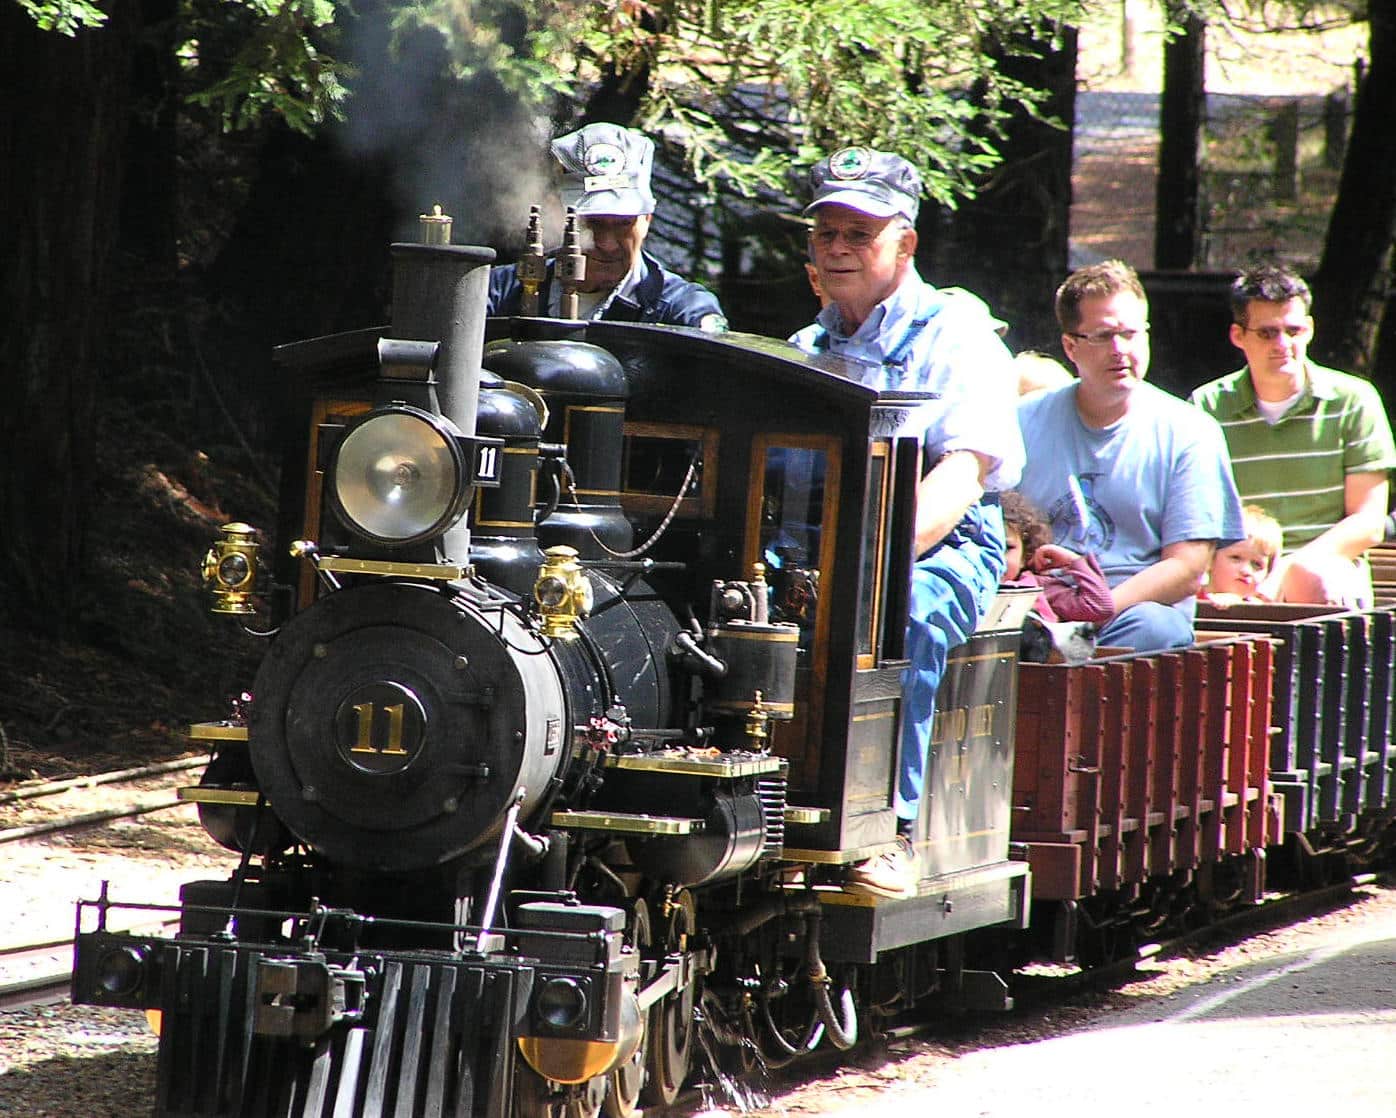 Two train engineers with striped caps drive a miniature steam train pulling open-air cars with parents and kids